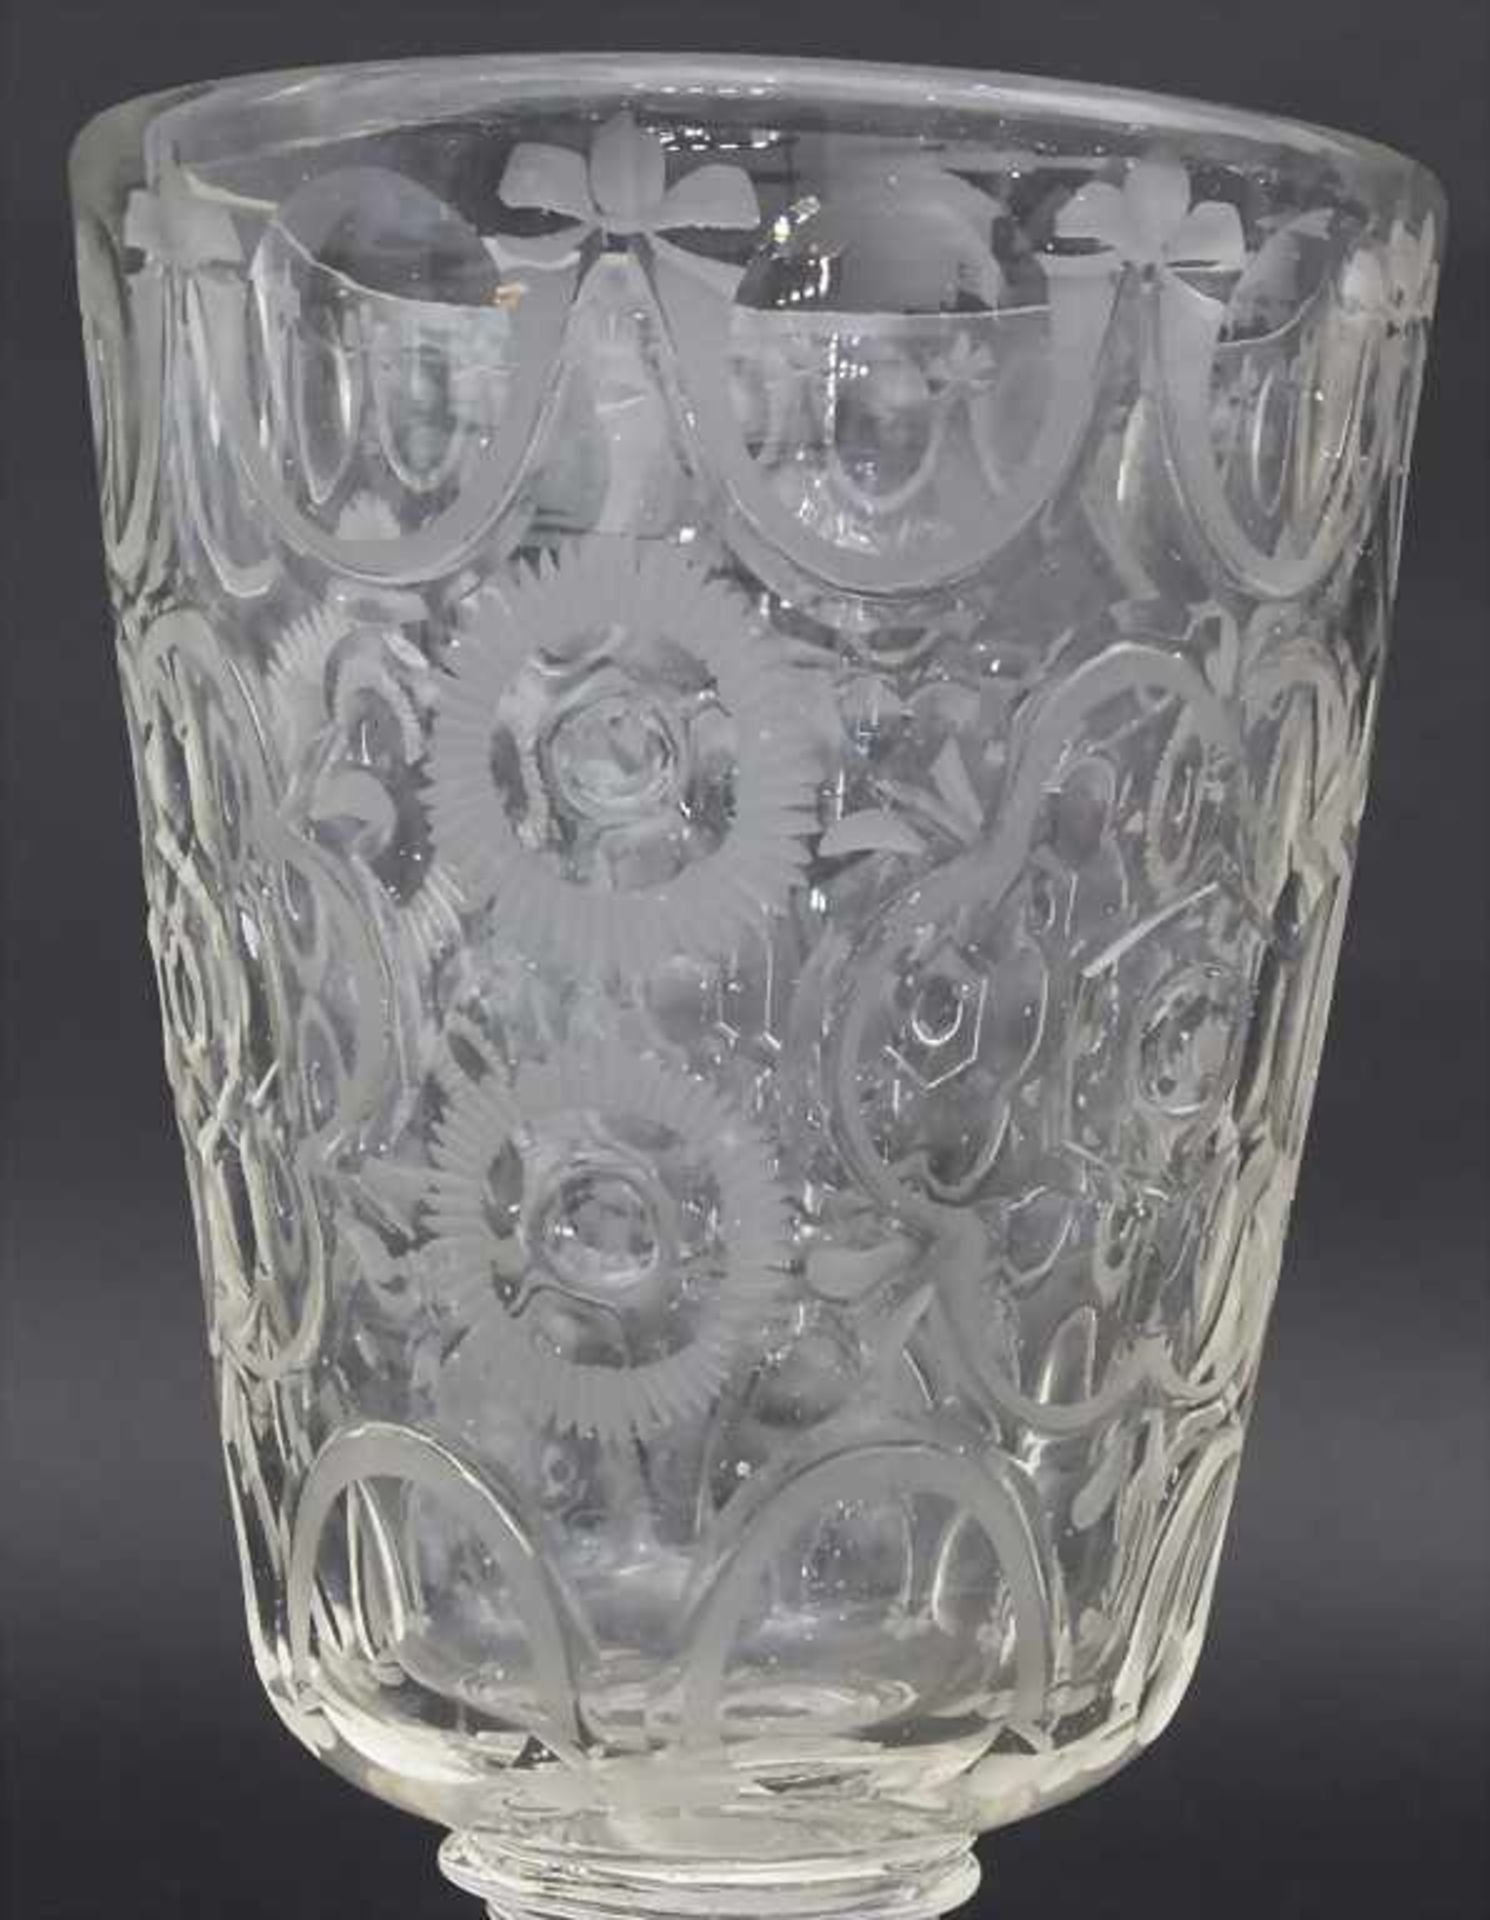 Seltener Schraubpokal / A rare glass chalice, Schlesien, 18. Jh.Material: farbloses Glas, - Image 2 of 6